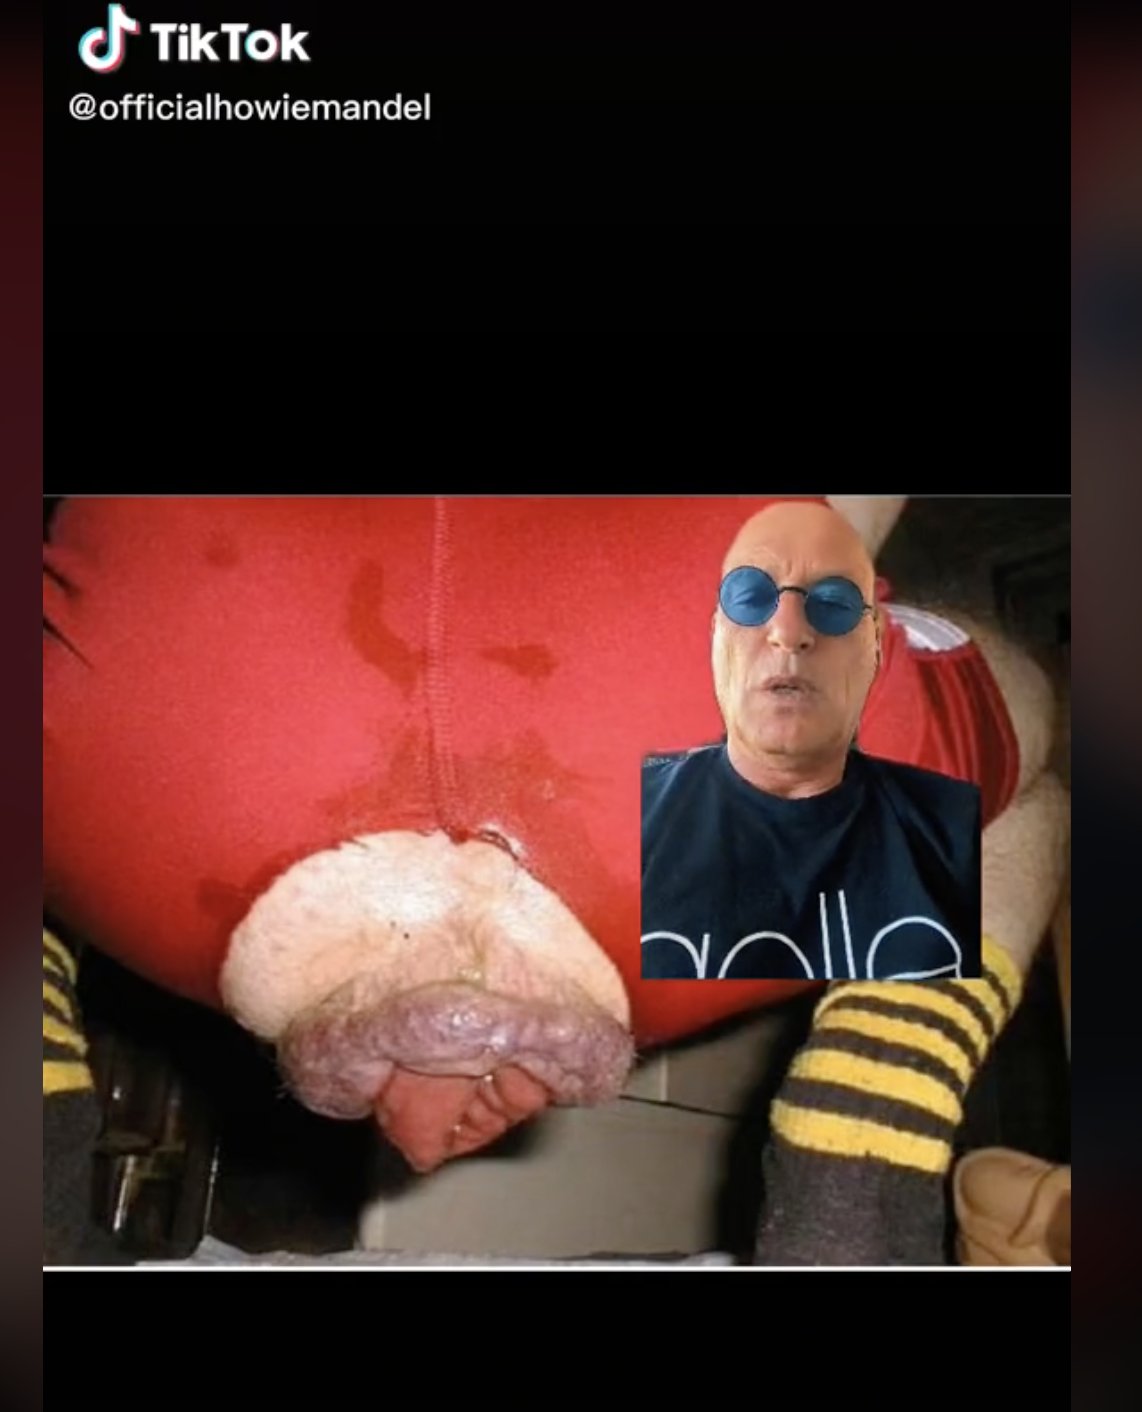 Perez Hilton on X: Howie Mandel posted a prolapsed anus video on TikTok  four hours ago and the video is still up. Thats allowed on TikTok now?  t.cobq6VYQUvMp  X